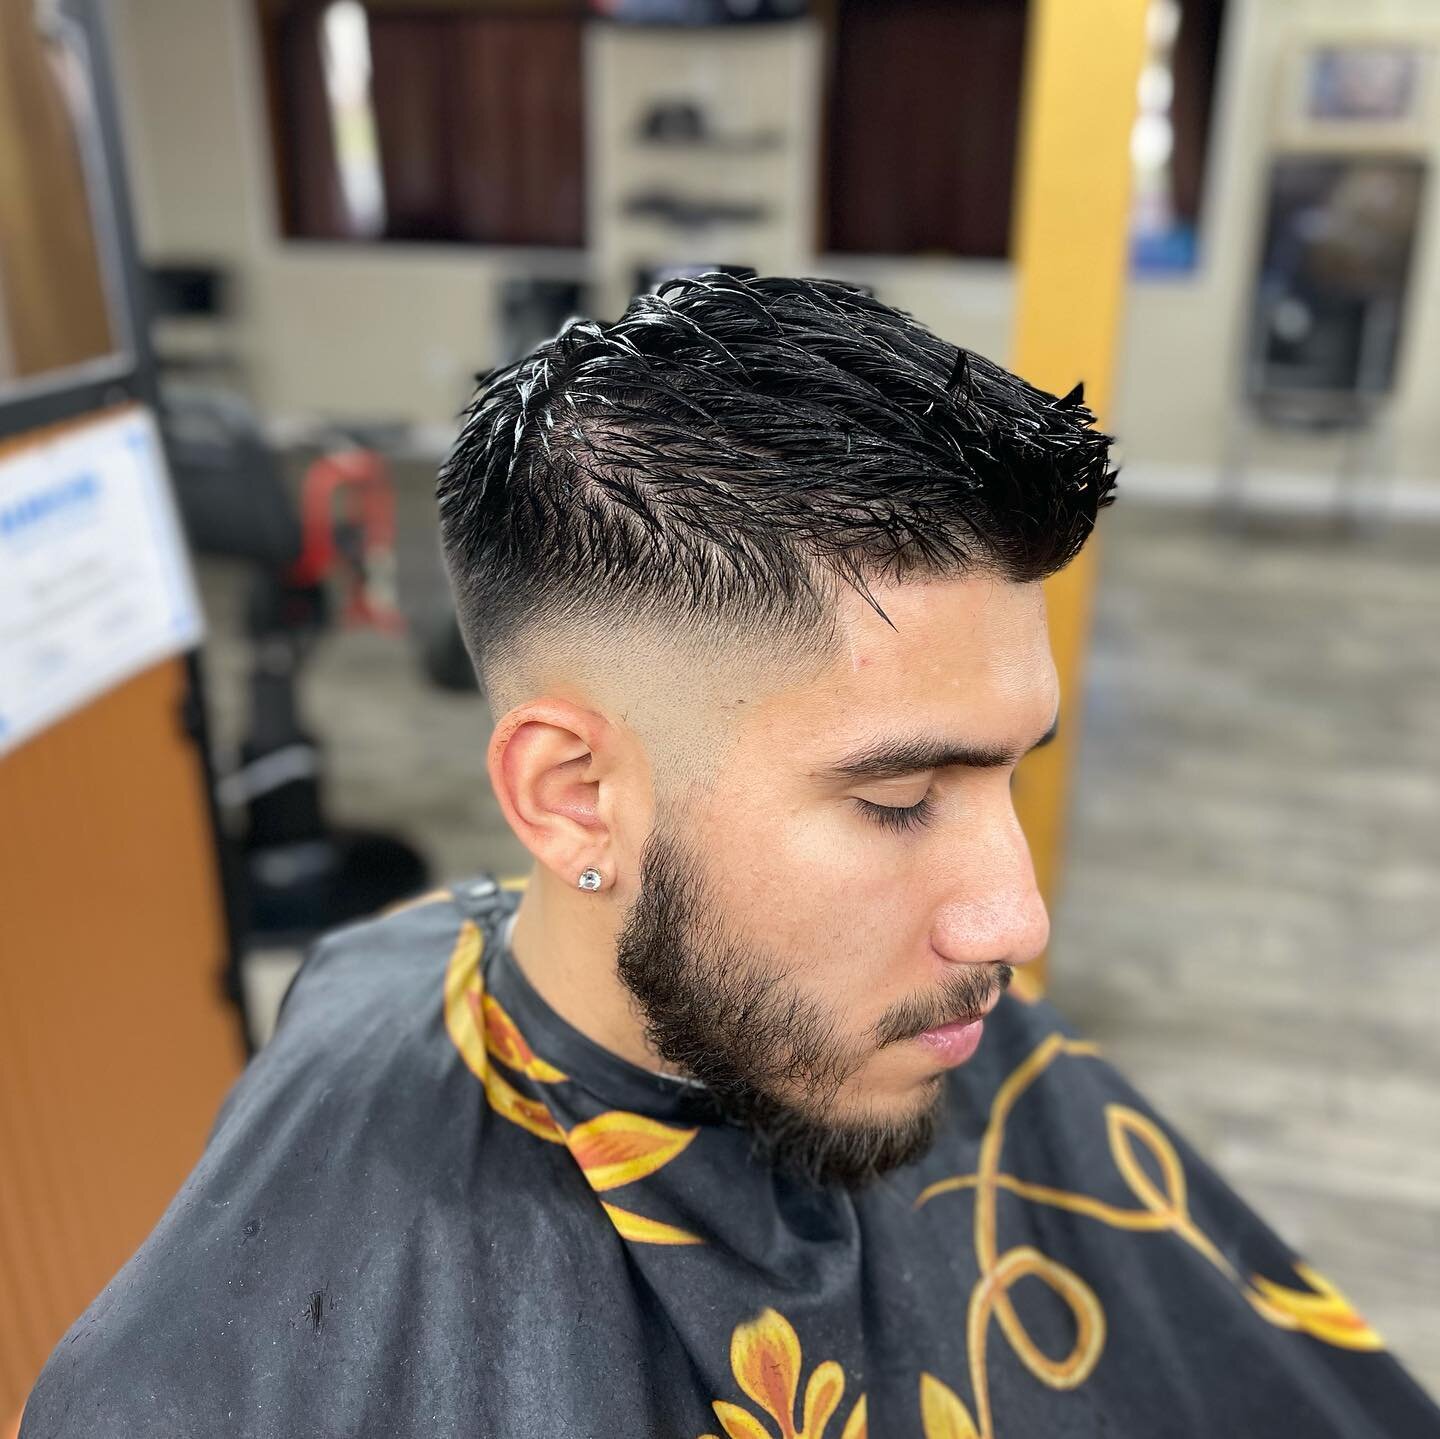 💈Keep swiping to see all angles ~~&gt;💈
.
.
.
#karizcutz #eaziKutz #barberlife #barberconnect #tville #stroudsburg #passion #loveyourcraft #cosmo #keepingitclean #skinfade #sheerwork #booktoday #holidaycuts #life #cuts #clipperwork #hair #loveyourc